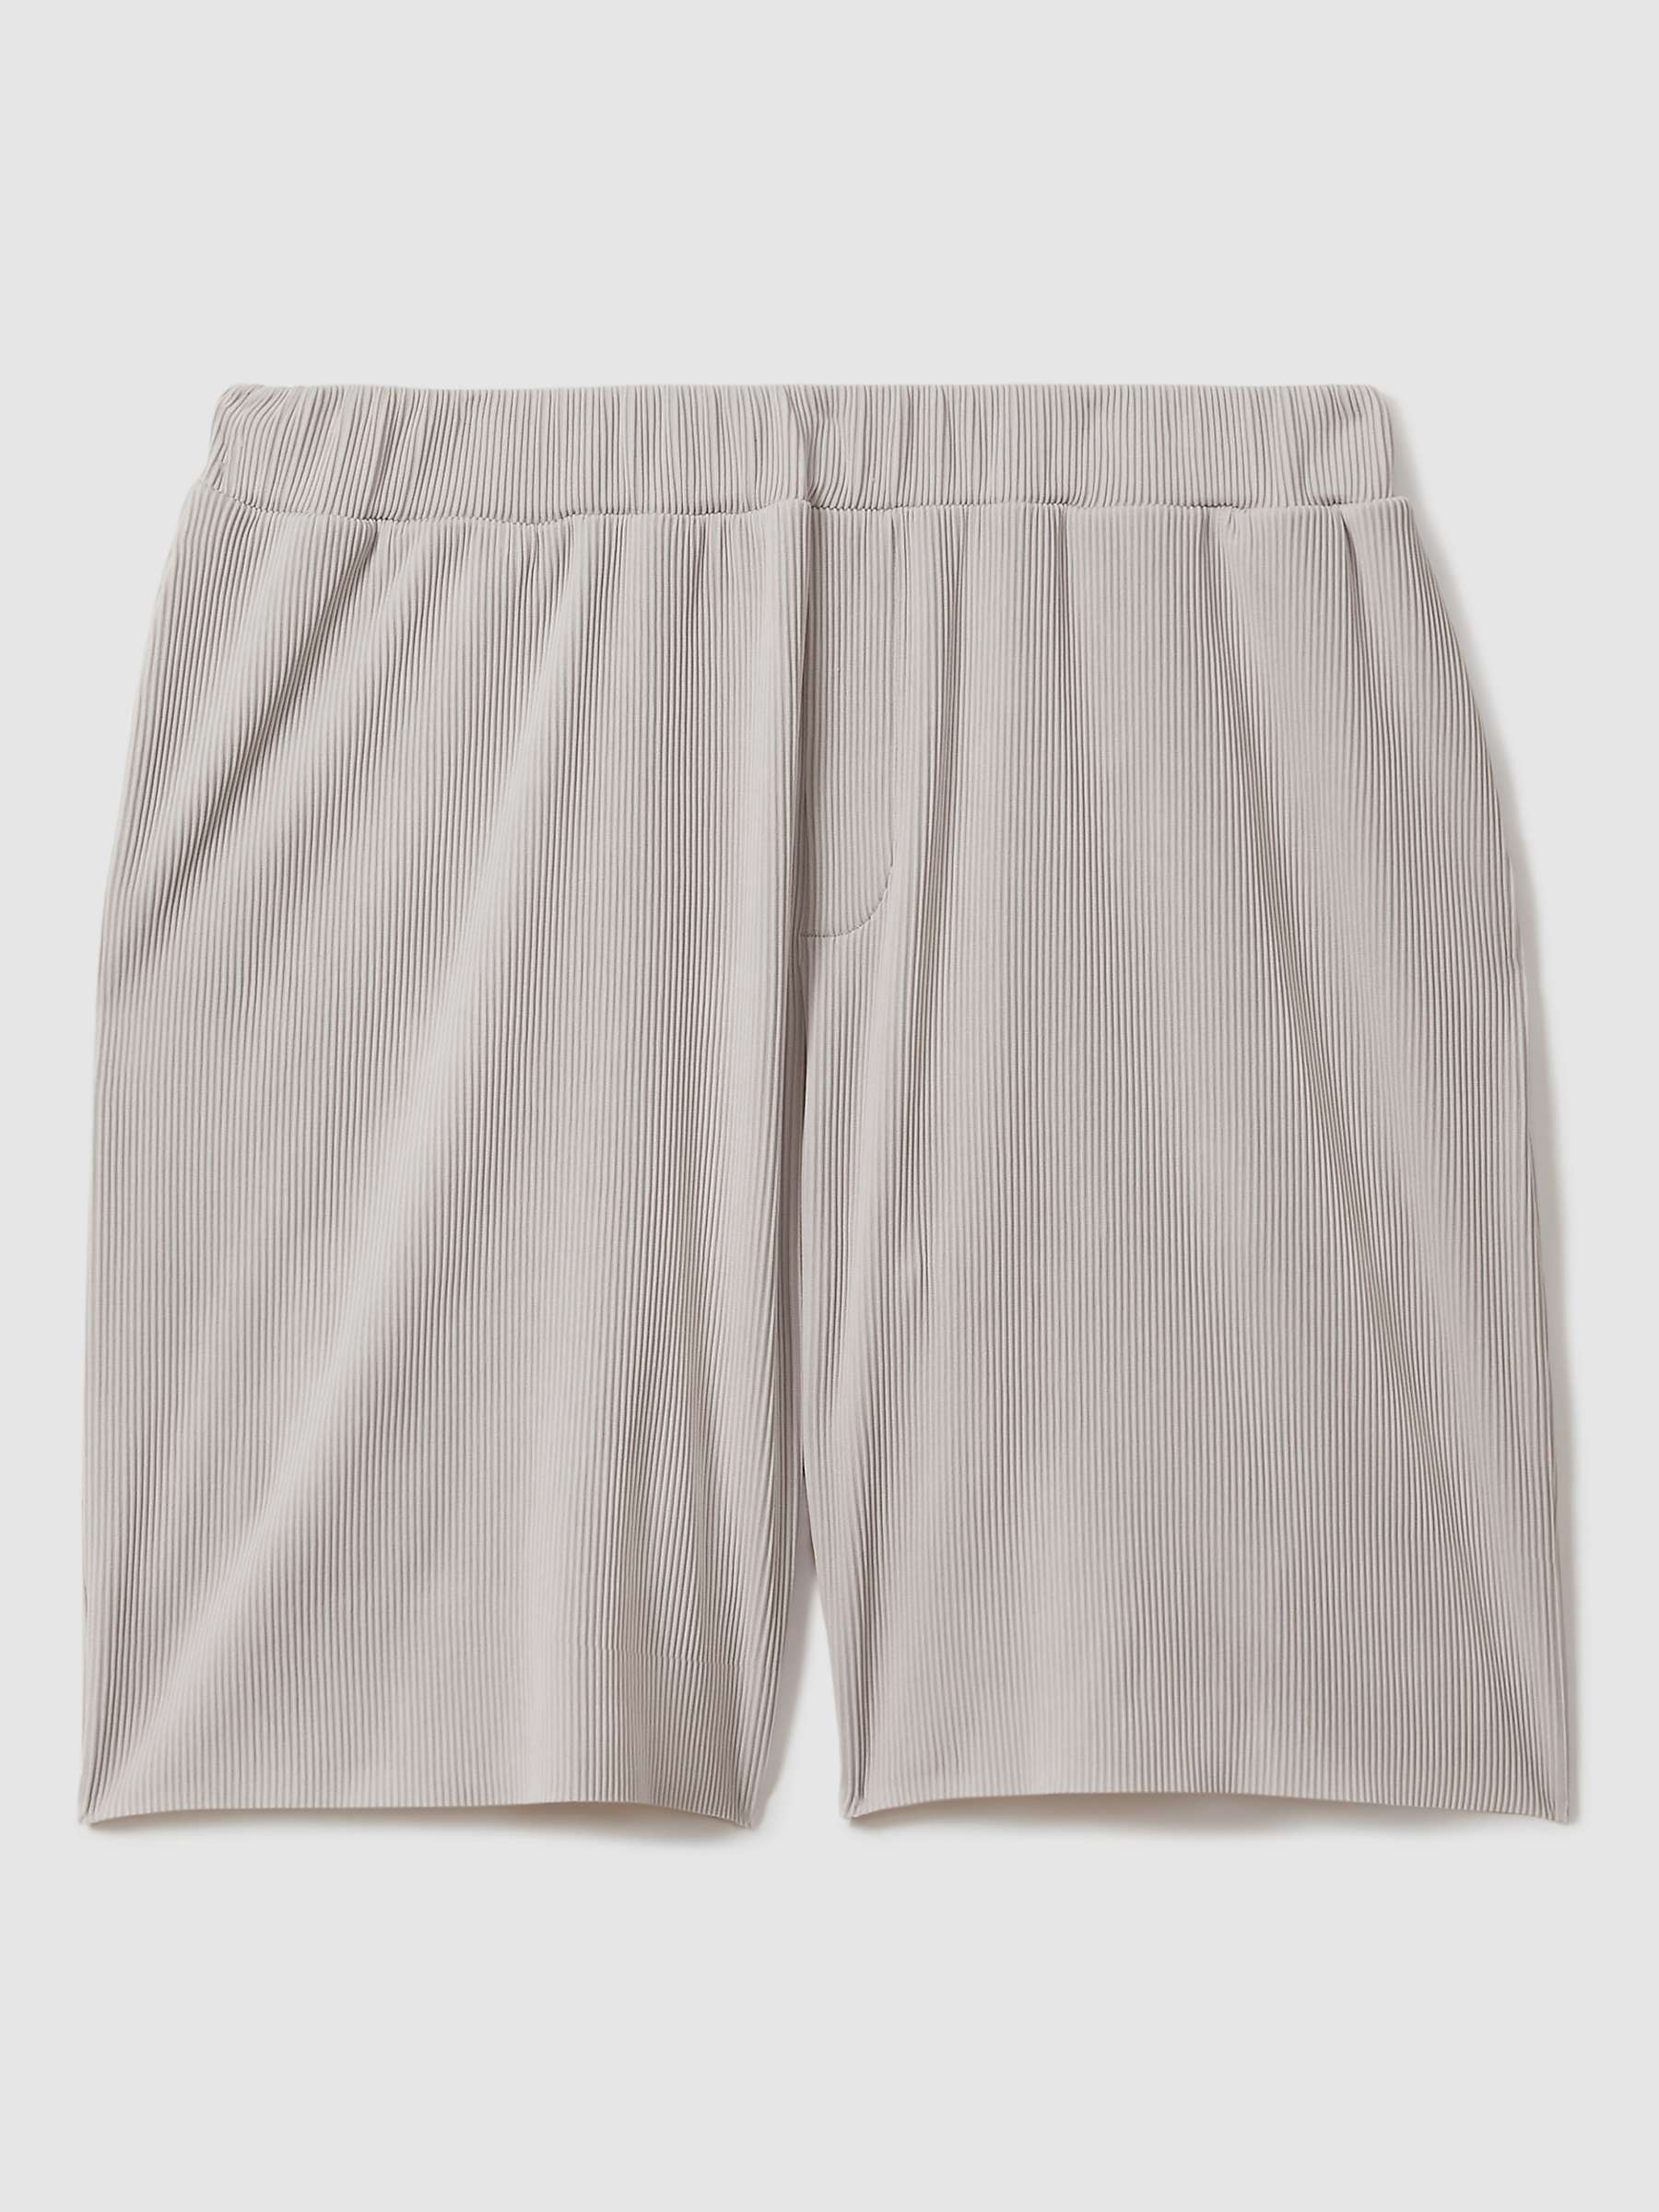 Buy Reiss Conor Drawstring Shorts, Silver Online at johnlewis.com